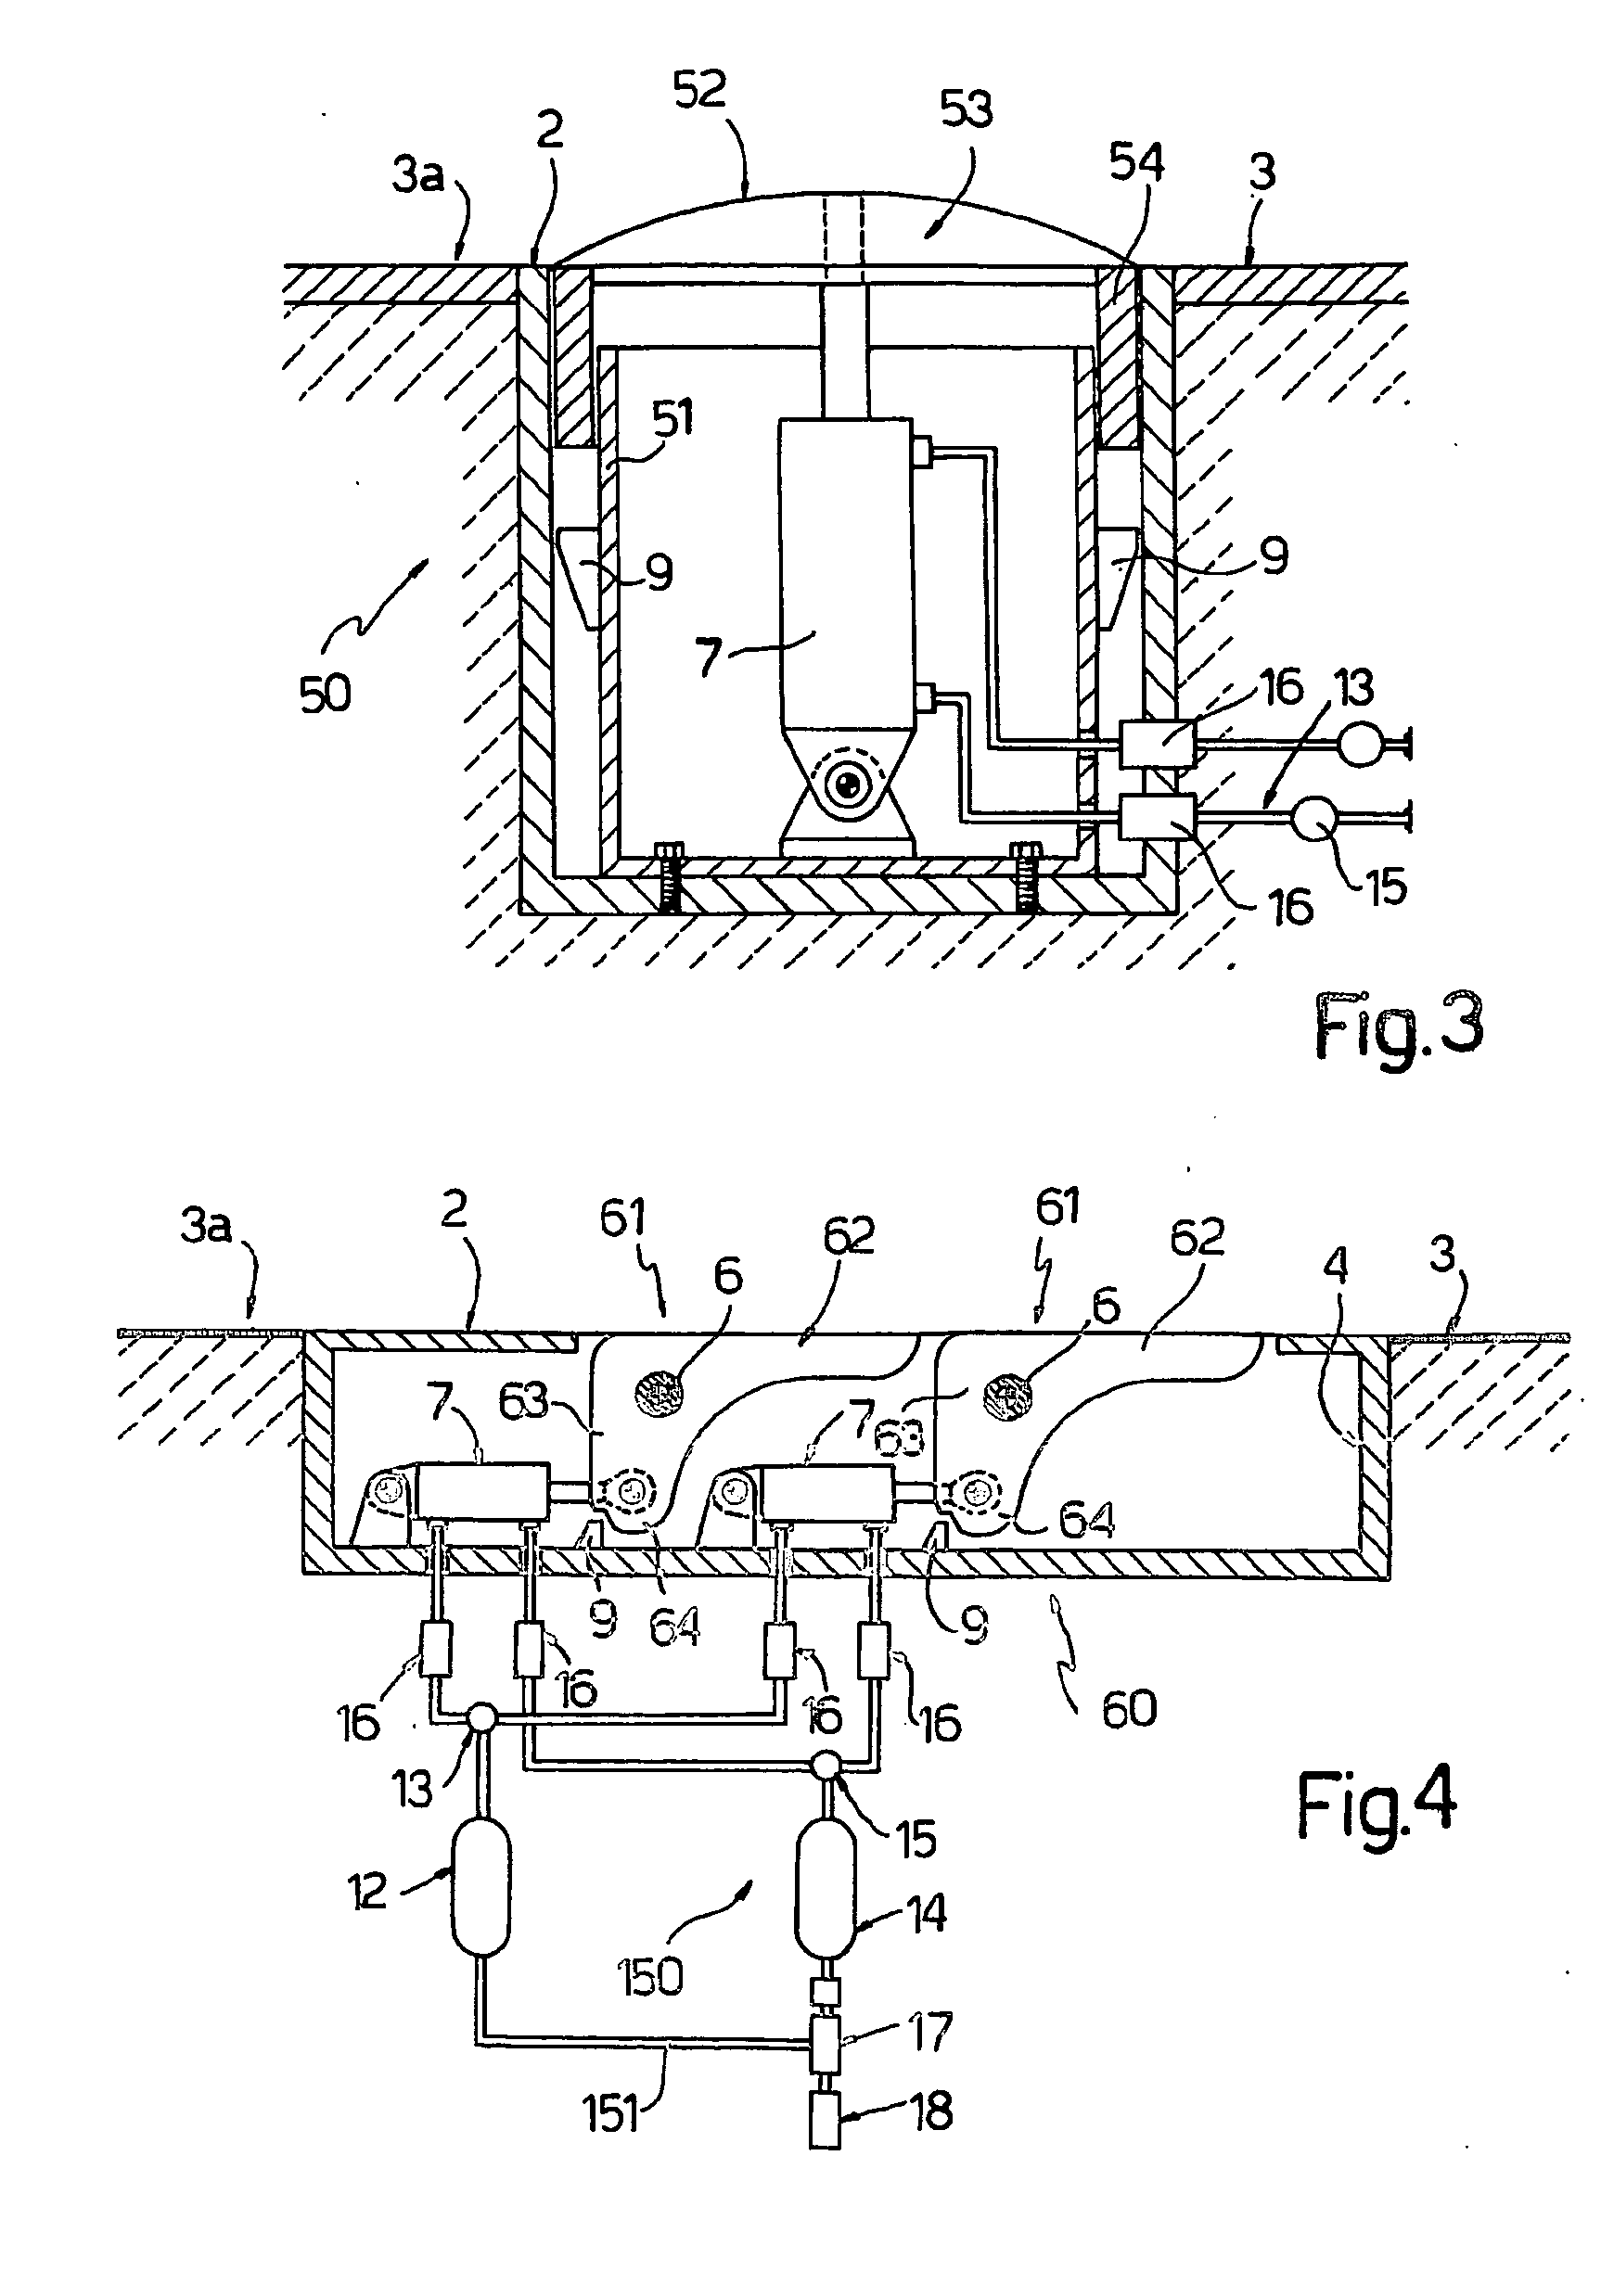 Fluid Device for Recovery of the Kinetic Energy of a Vehicle